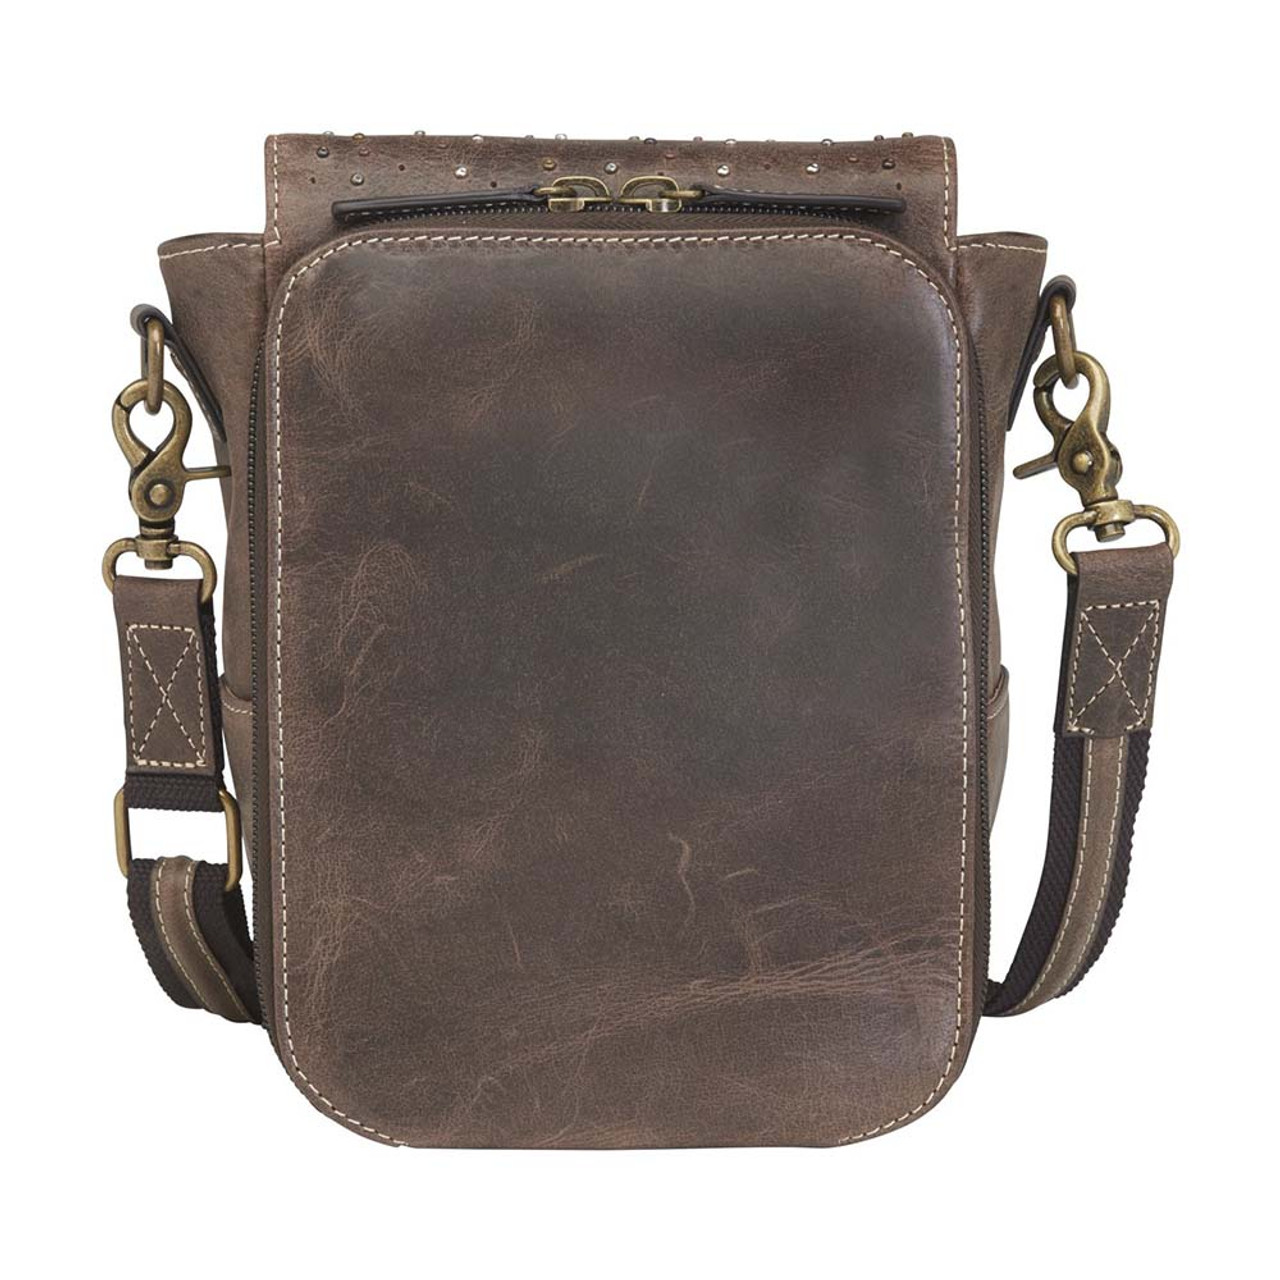 GTM Distressed Leather Conceal Carry Cross Body Satchel